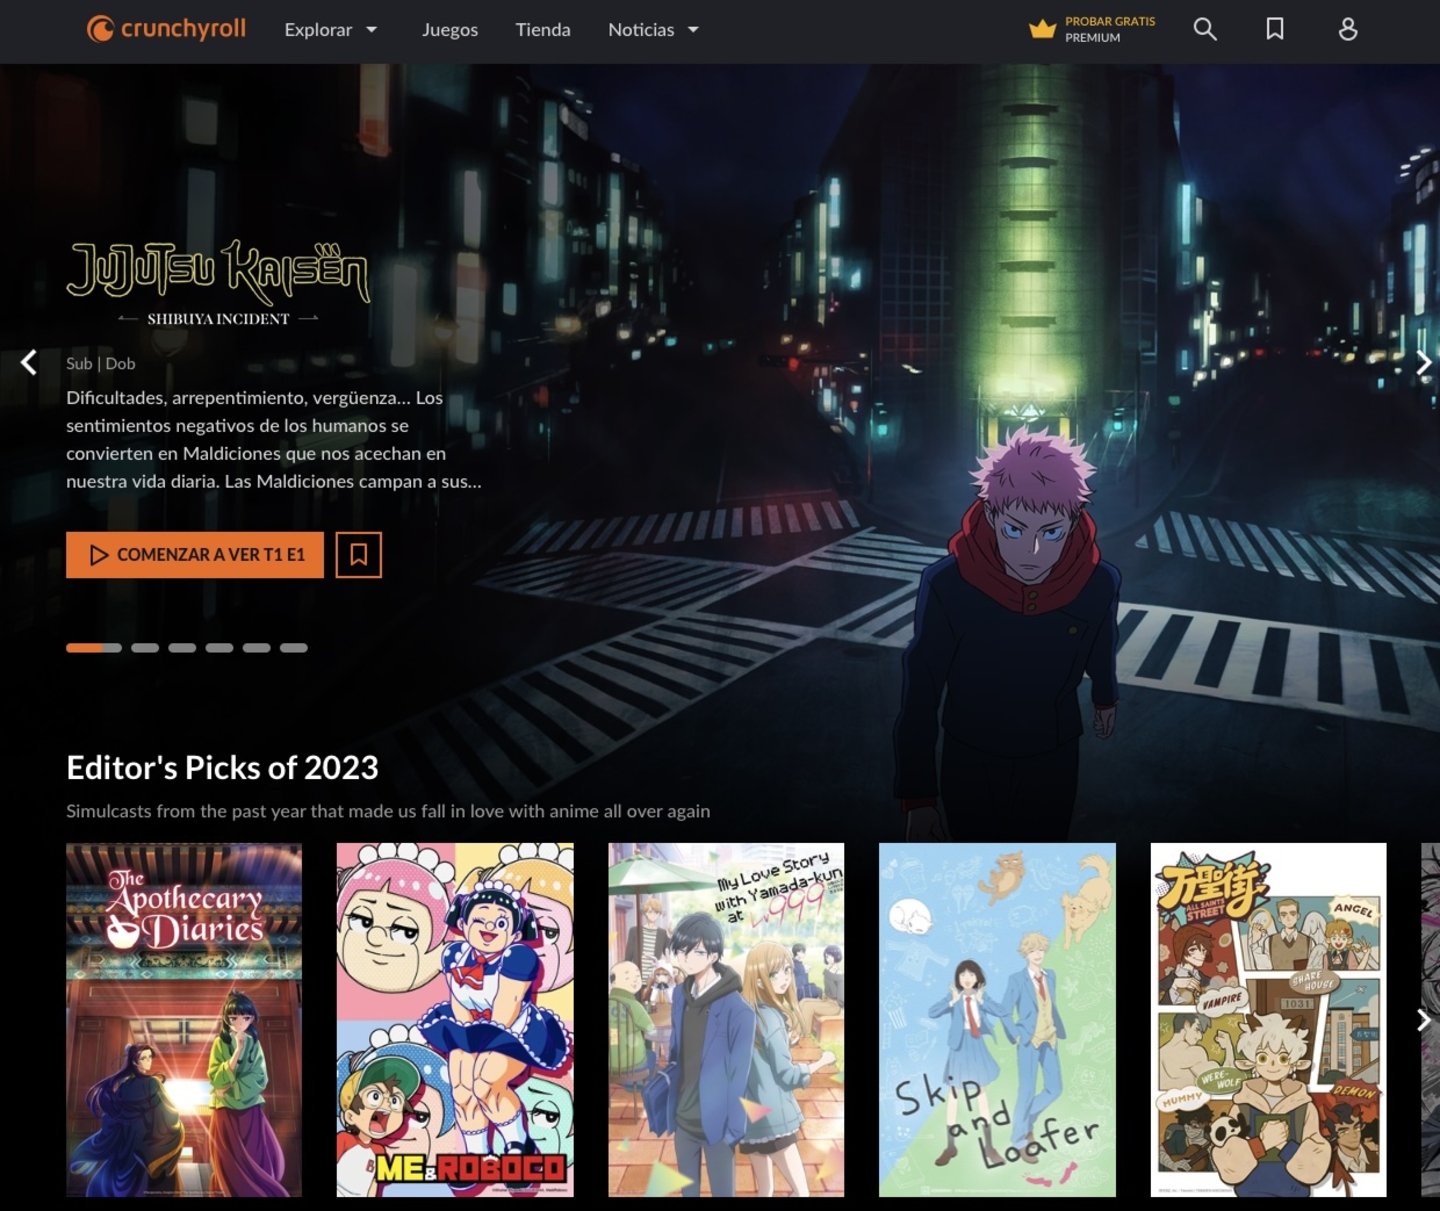 AnimeFrenzy: Watch Anime Online Watch Anime Subbed, Anime Dubbed Very  Relaxing View to Watch Anime All Animes Are Available Here.